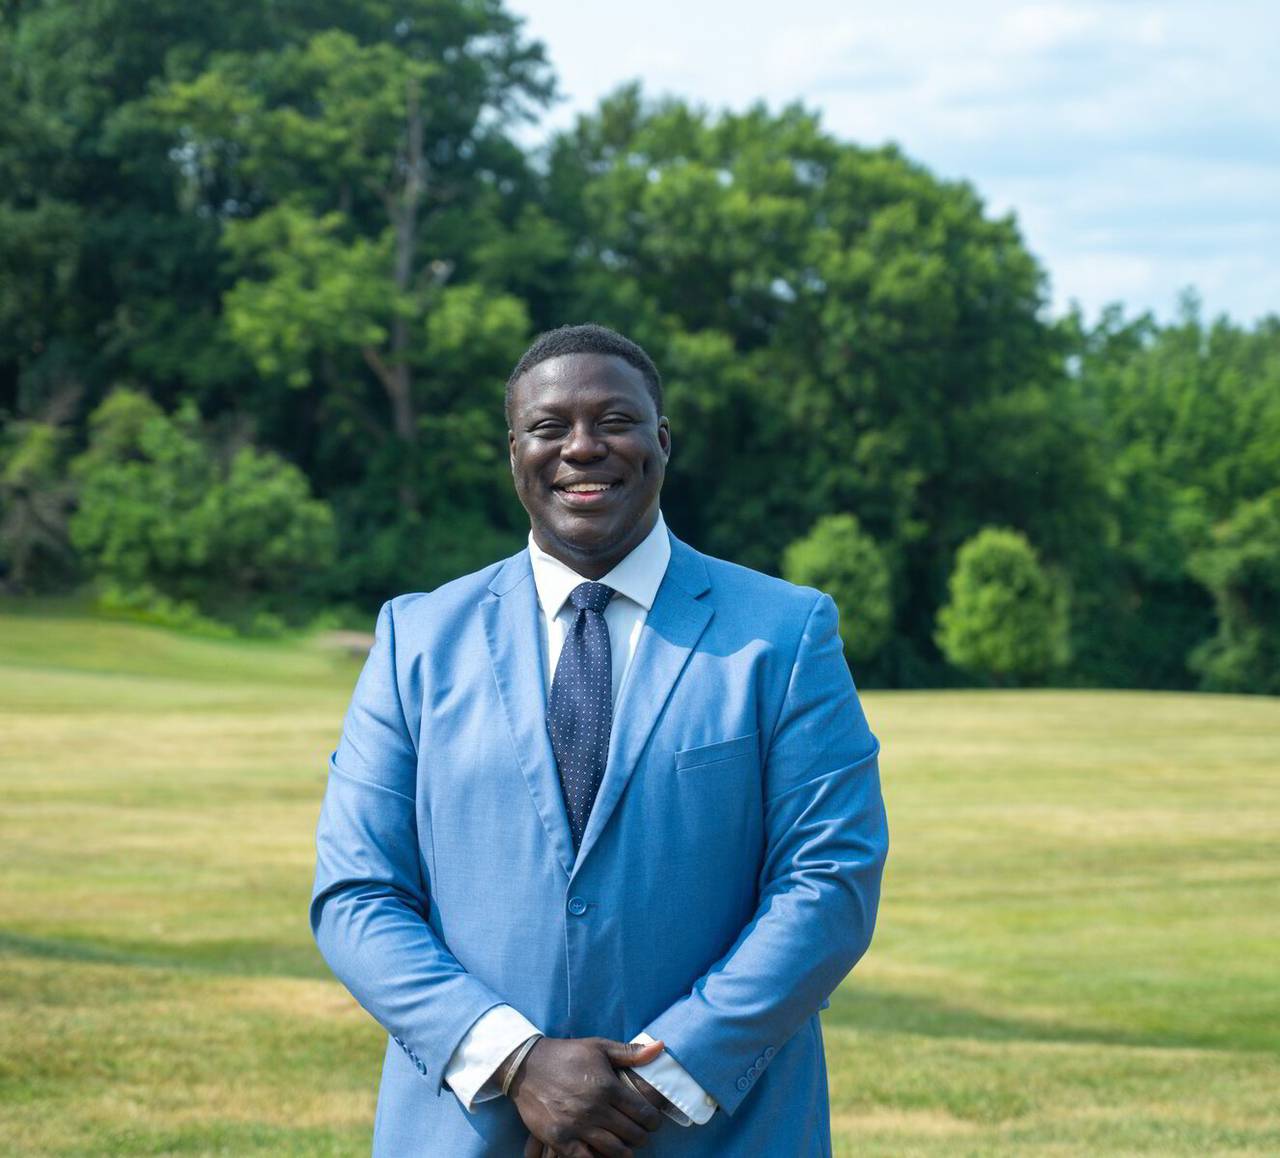 A photo of Steven T. Johnson in a light blue suit, dotted navy tie, and white shirt, with a clear grassy field and trees behind him.